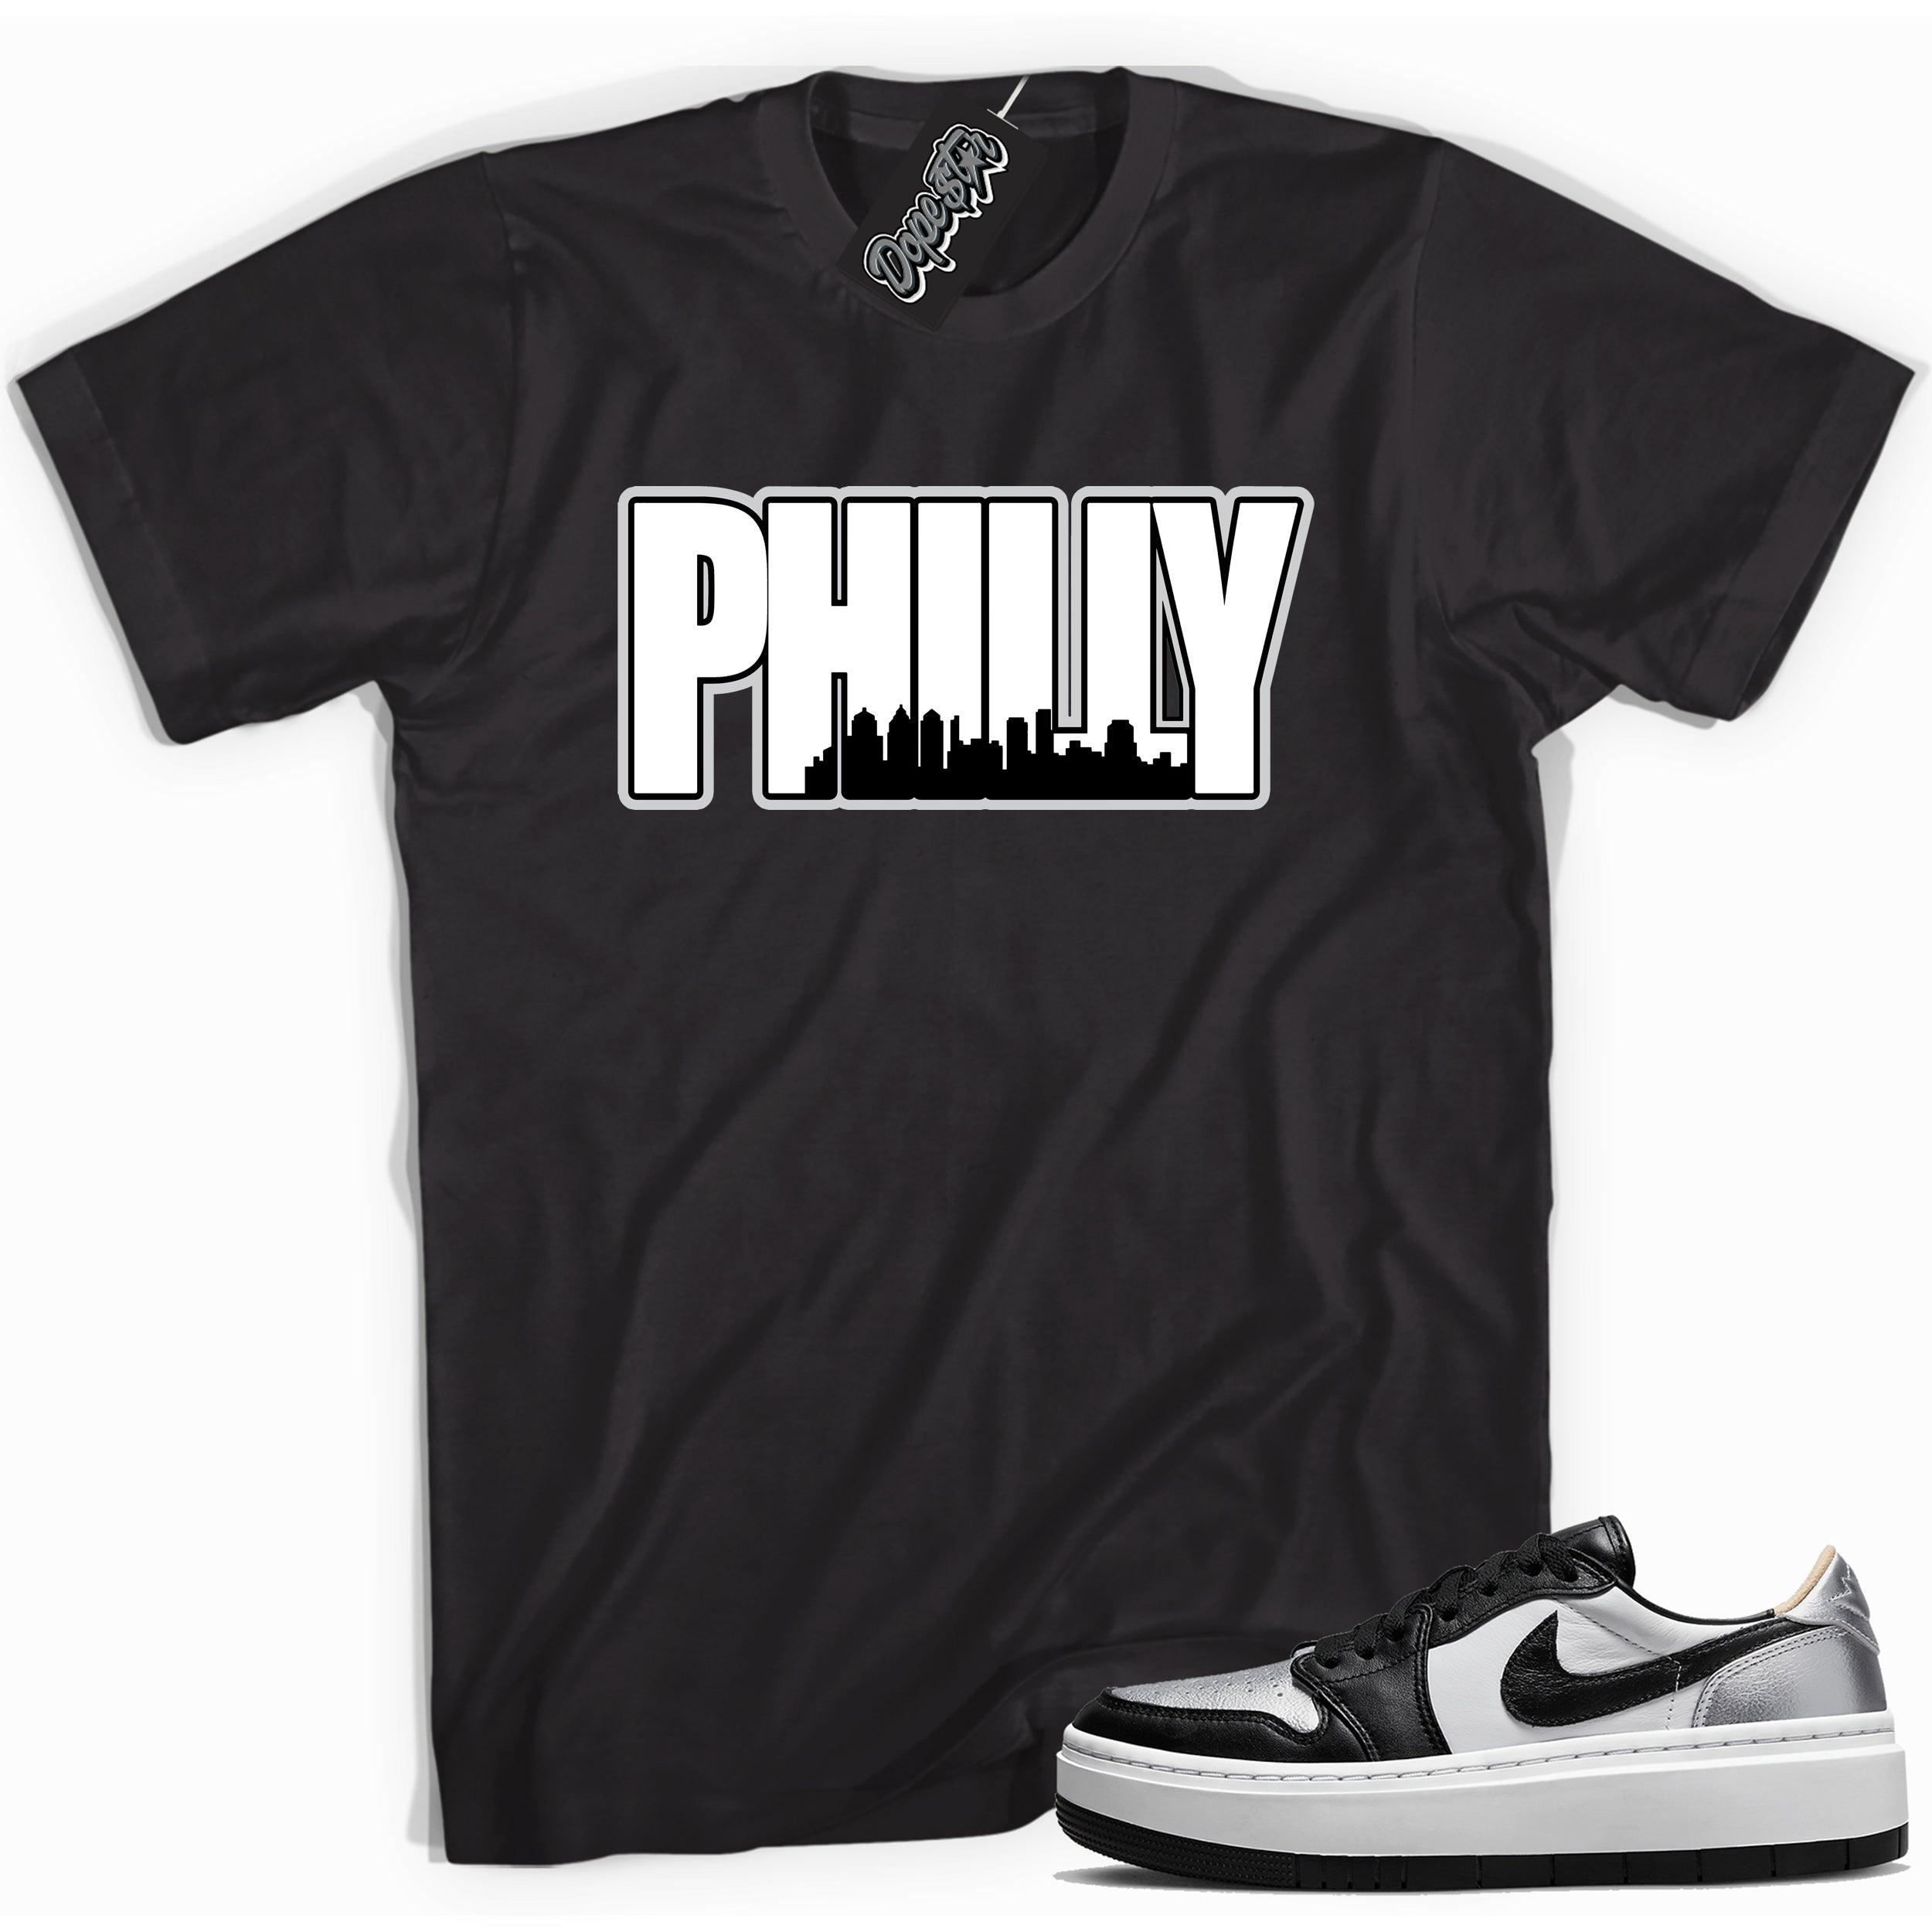 Cool black graphic tee with 'philly Philadelphia ' print, that perfectly matches Air Jordan 1 Elevate Low SE Silver Toe sneakers.